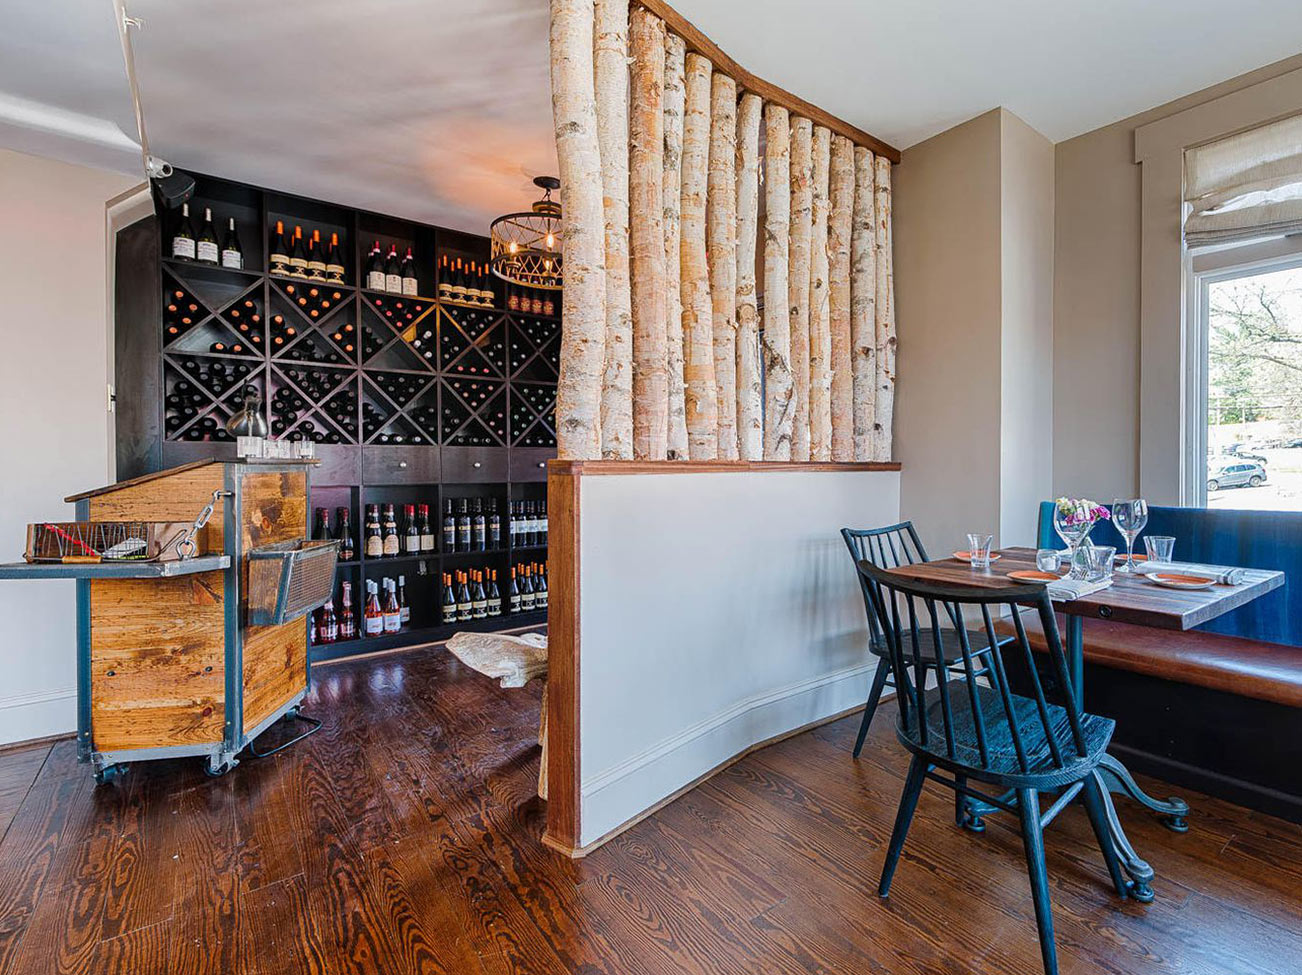 A wine room and office area, separated by a small curved wall, wood floor, and blue-painted chairs.